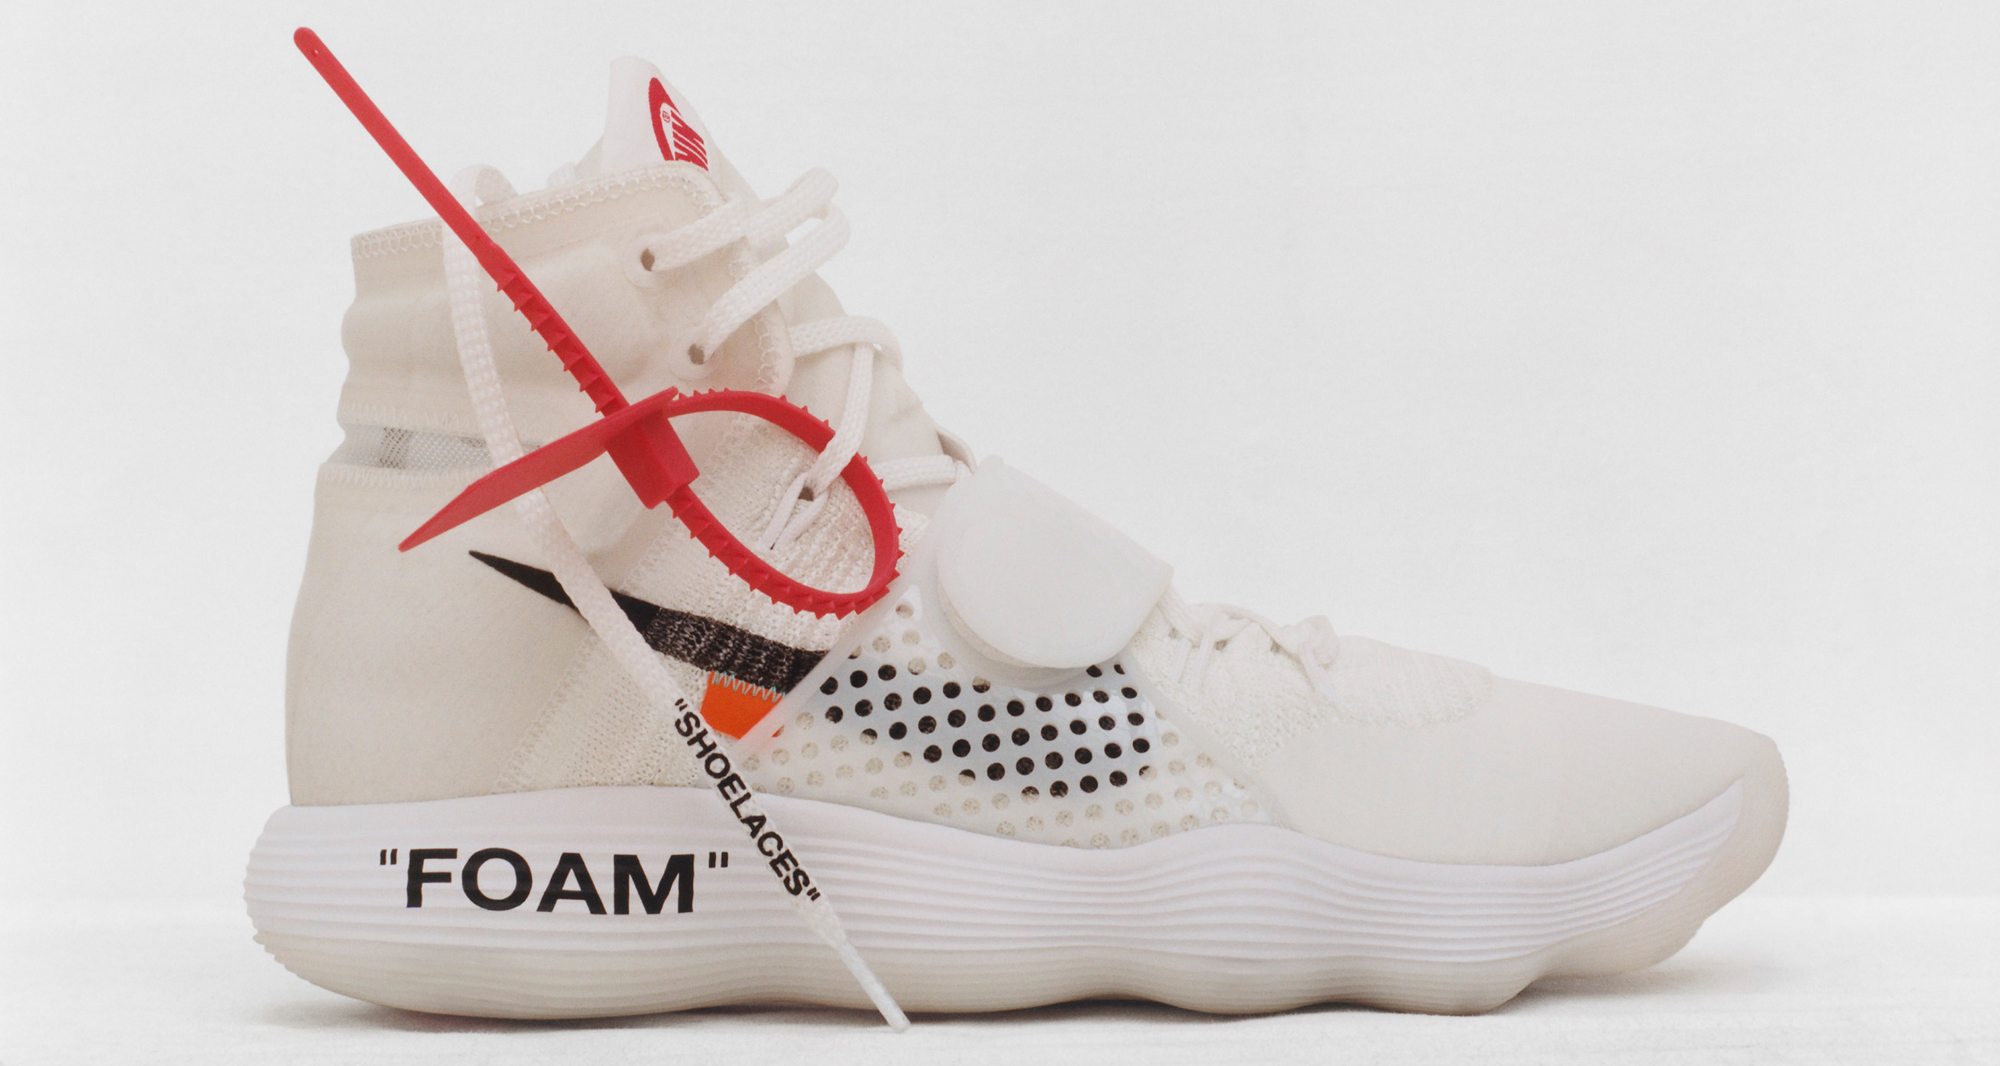 Off-White x Nike: The History Behind Virgil Abloh's Sneaker Collaborations, Sneakers, Sports Memorabilia & Modern Collectibles